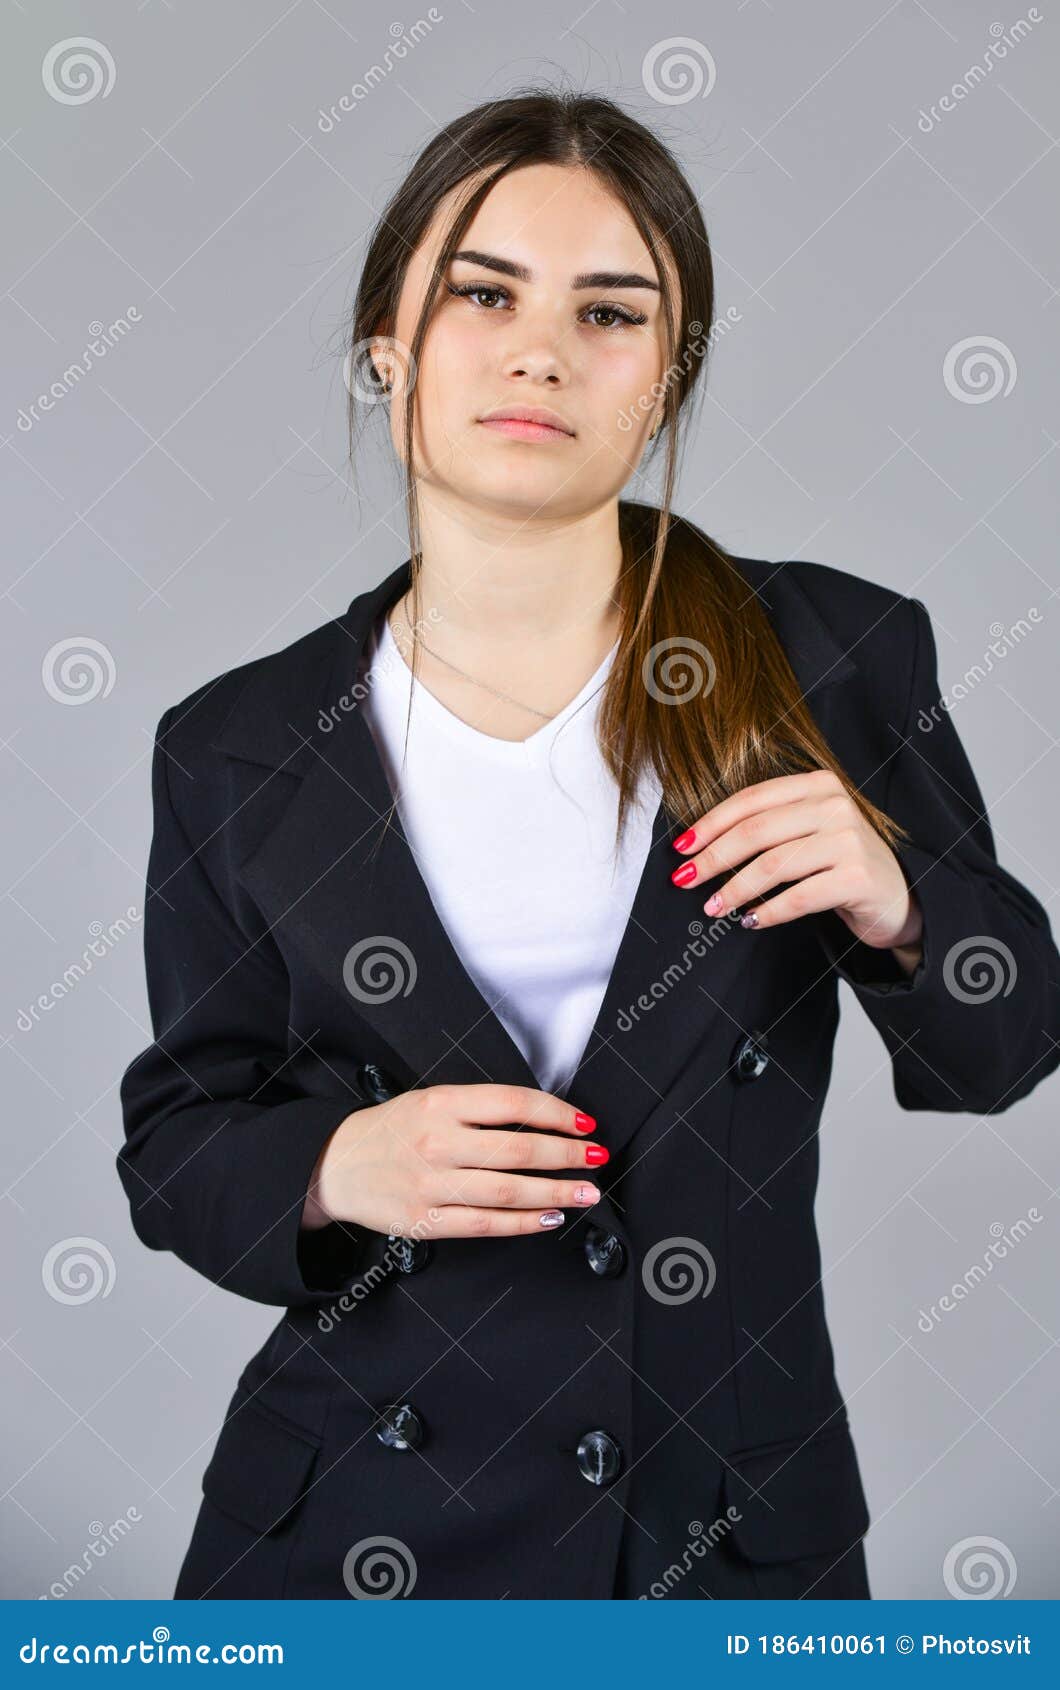 Businesswoman Wear Formal Suit. Hairdresser Beauty Salon. Cute Girl Has  Long Hair. Female Autumn Fashion Stock Image - Image of clothes, hair:  186410061